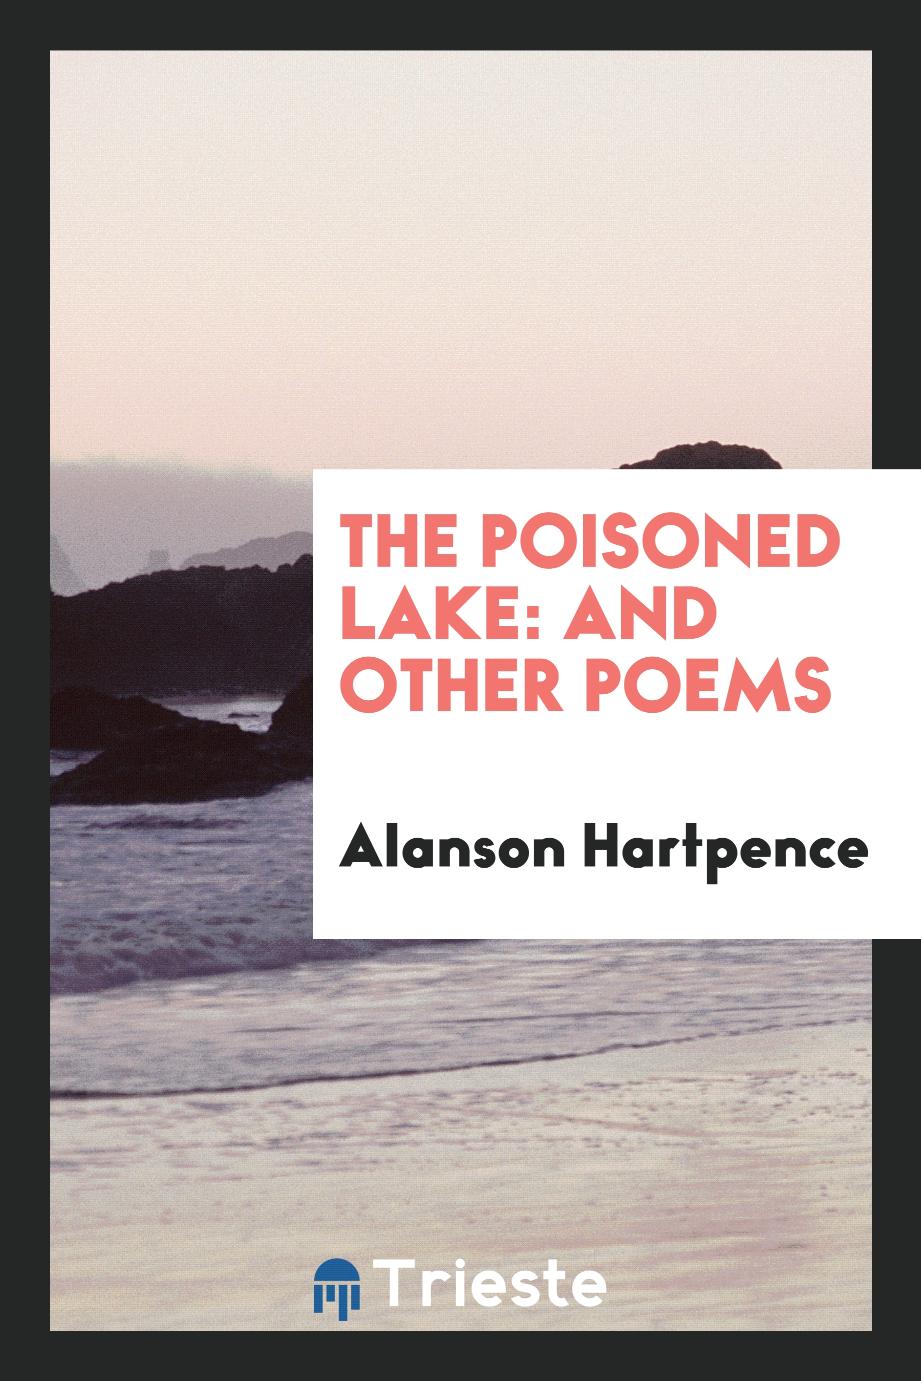 The Poisoned Lake: And Other Poems